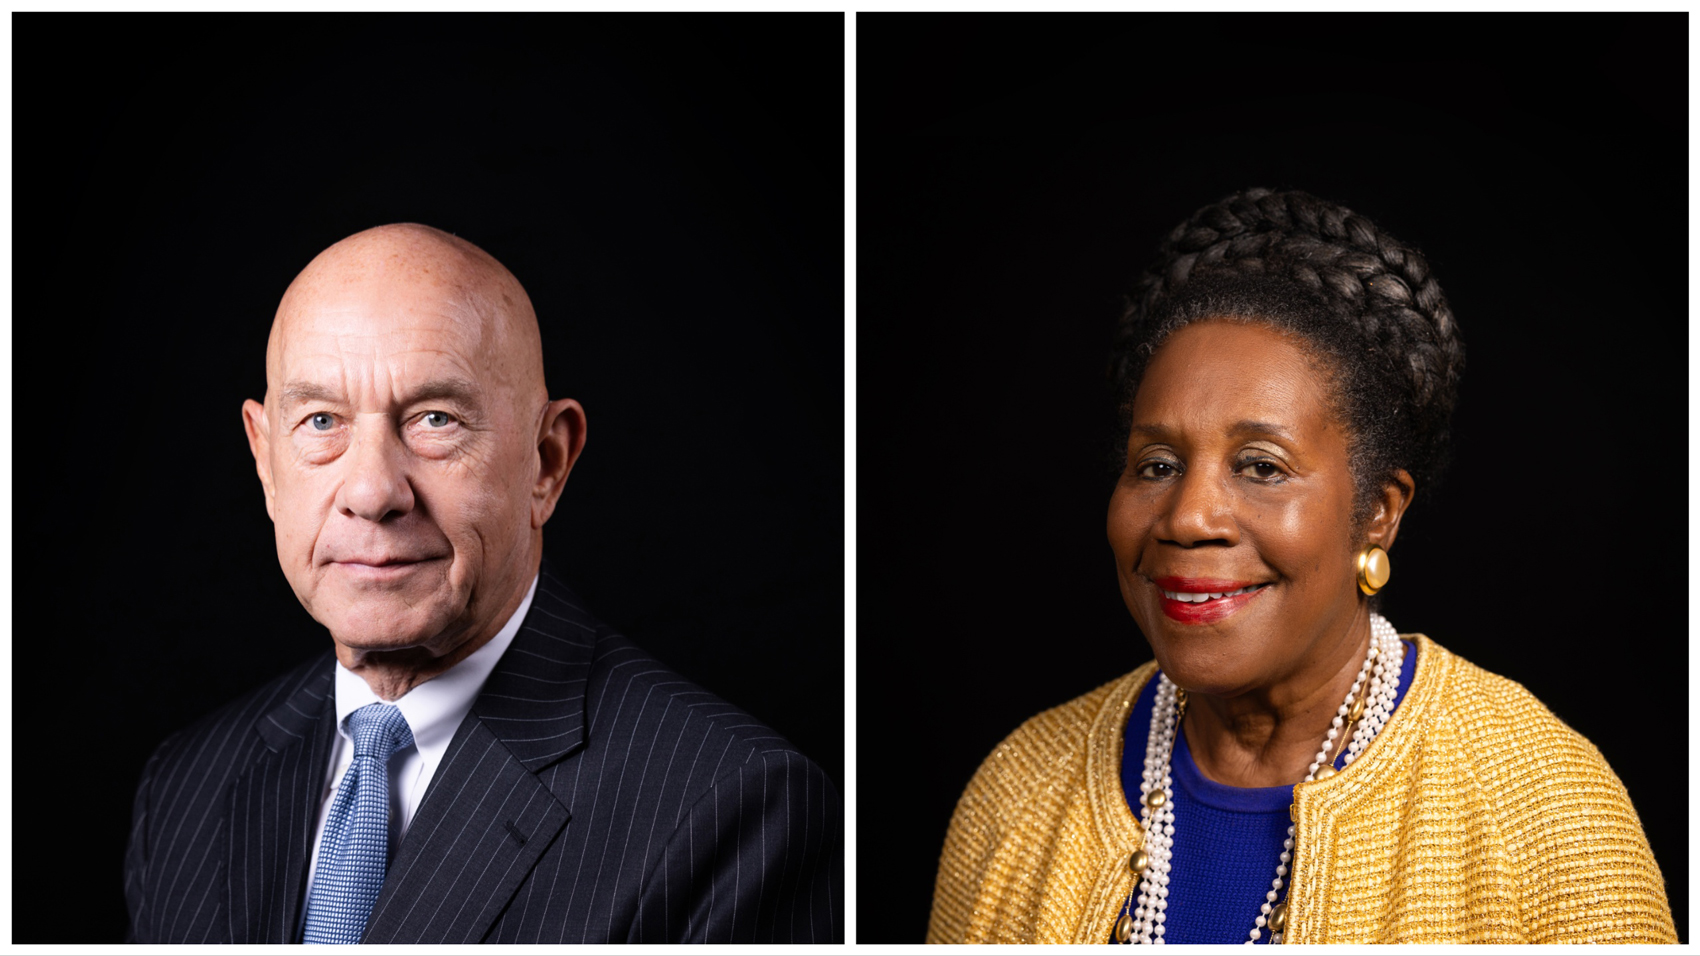 State Sen. John Whitmire, left, and U.S. Rep. Sheila Jackson Lee are headed for a Dec. 9 runoff, according to early and absentee voting results.